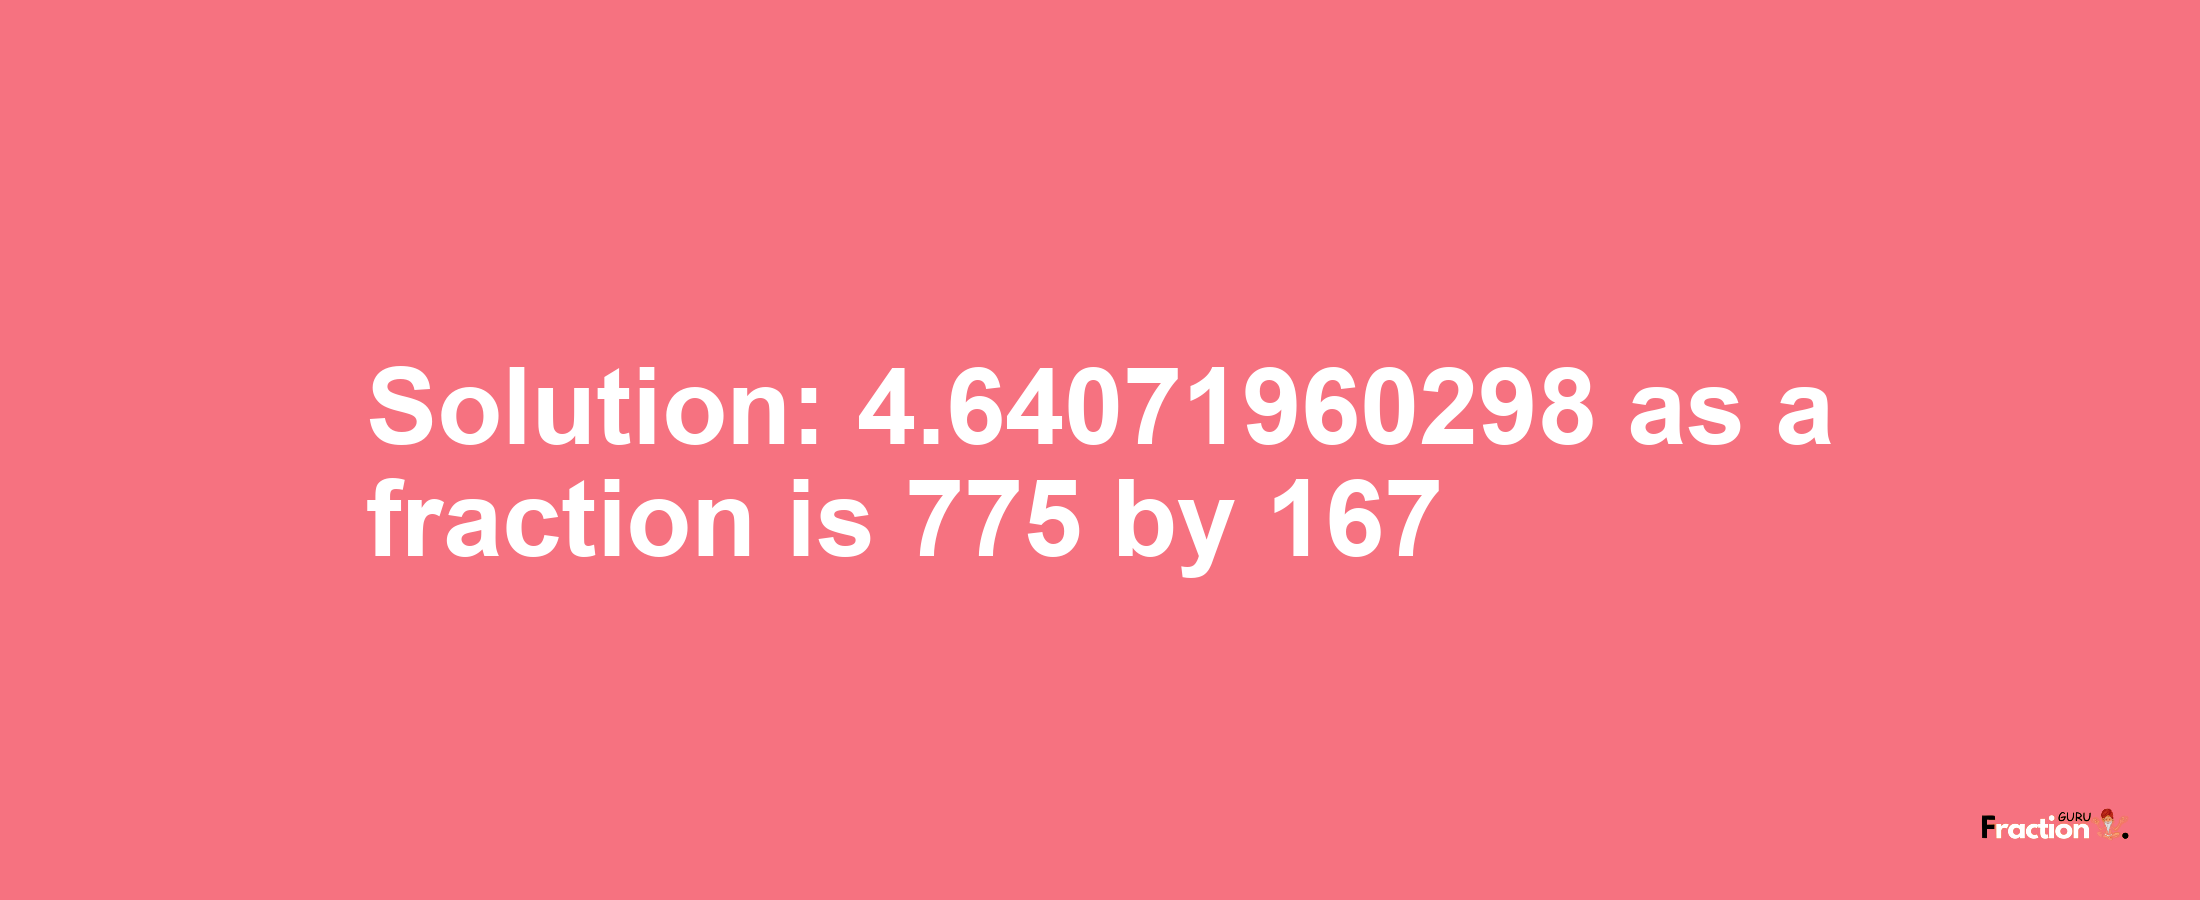 Solution:4.64071960298 as a fraction is 775/167